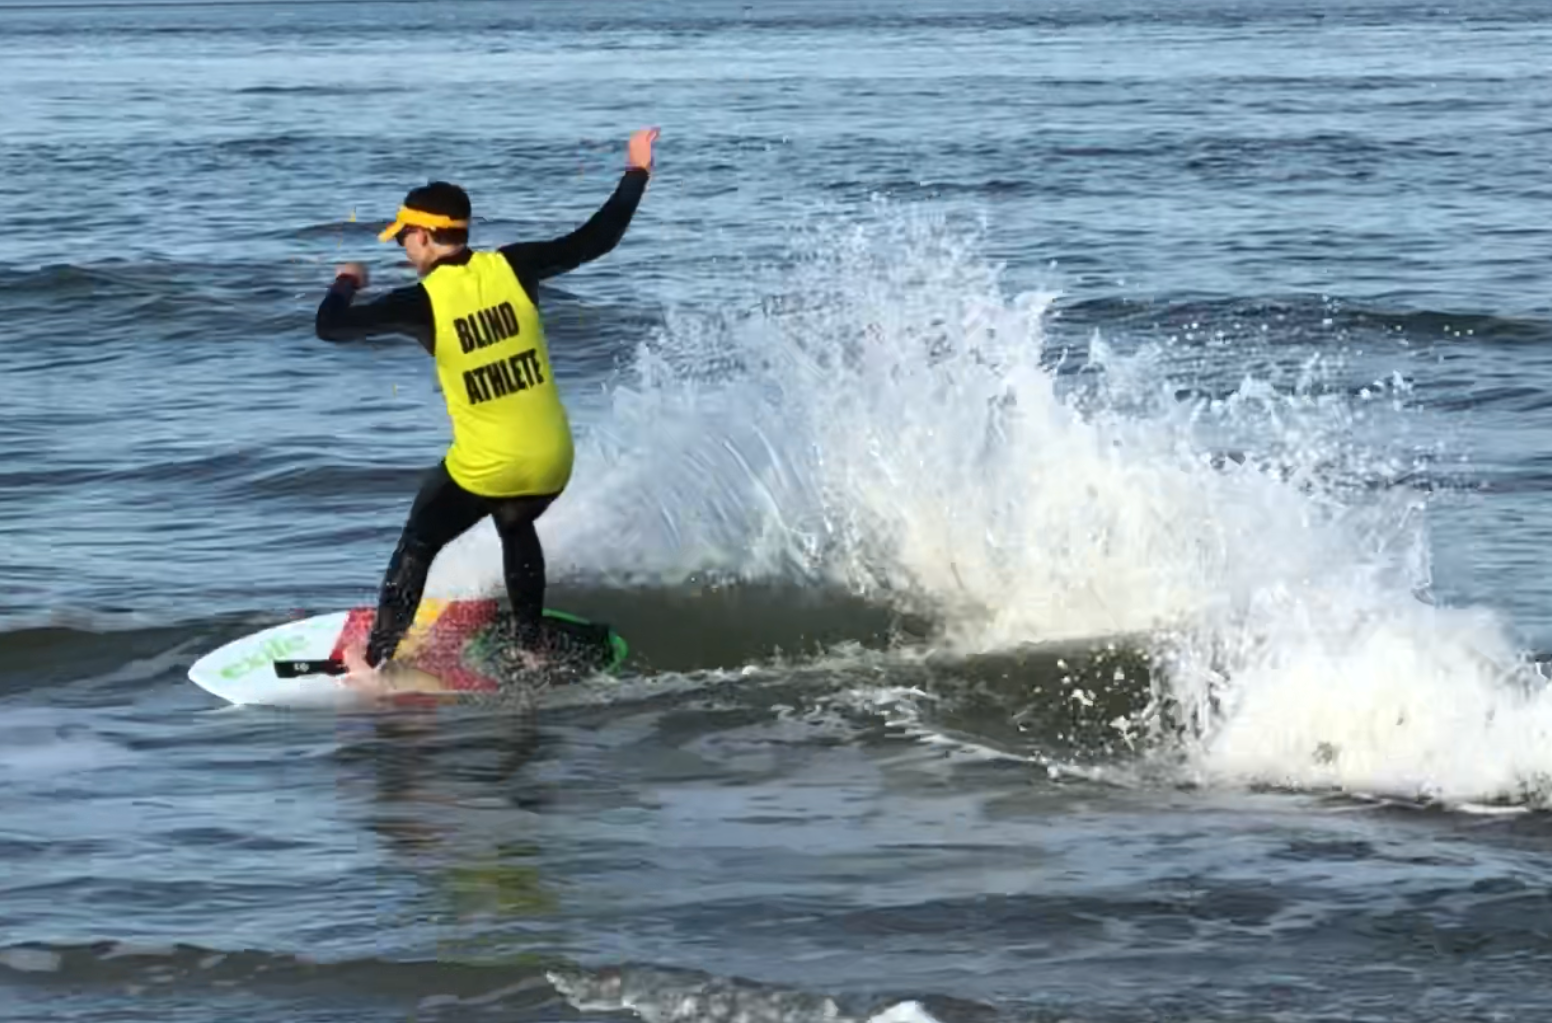 Kai Owens, skimboarding on an ocean wave. He's wearing black sunglasses, a bright yellow sun visor and a bright yellow jersey that reads BLIND ATHLETE over a black wetsuit.